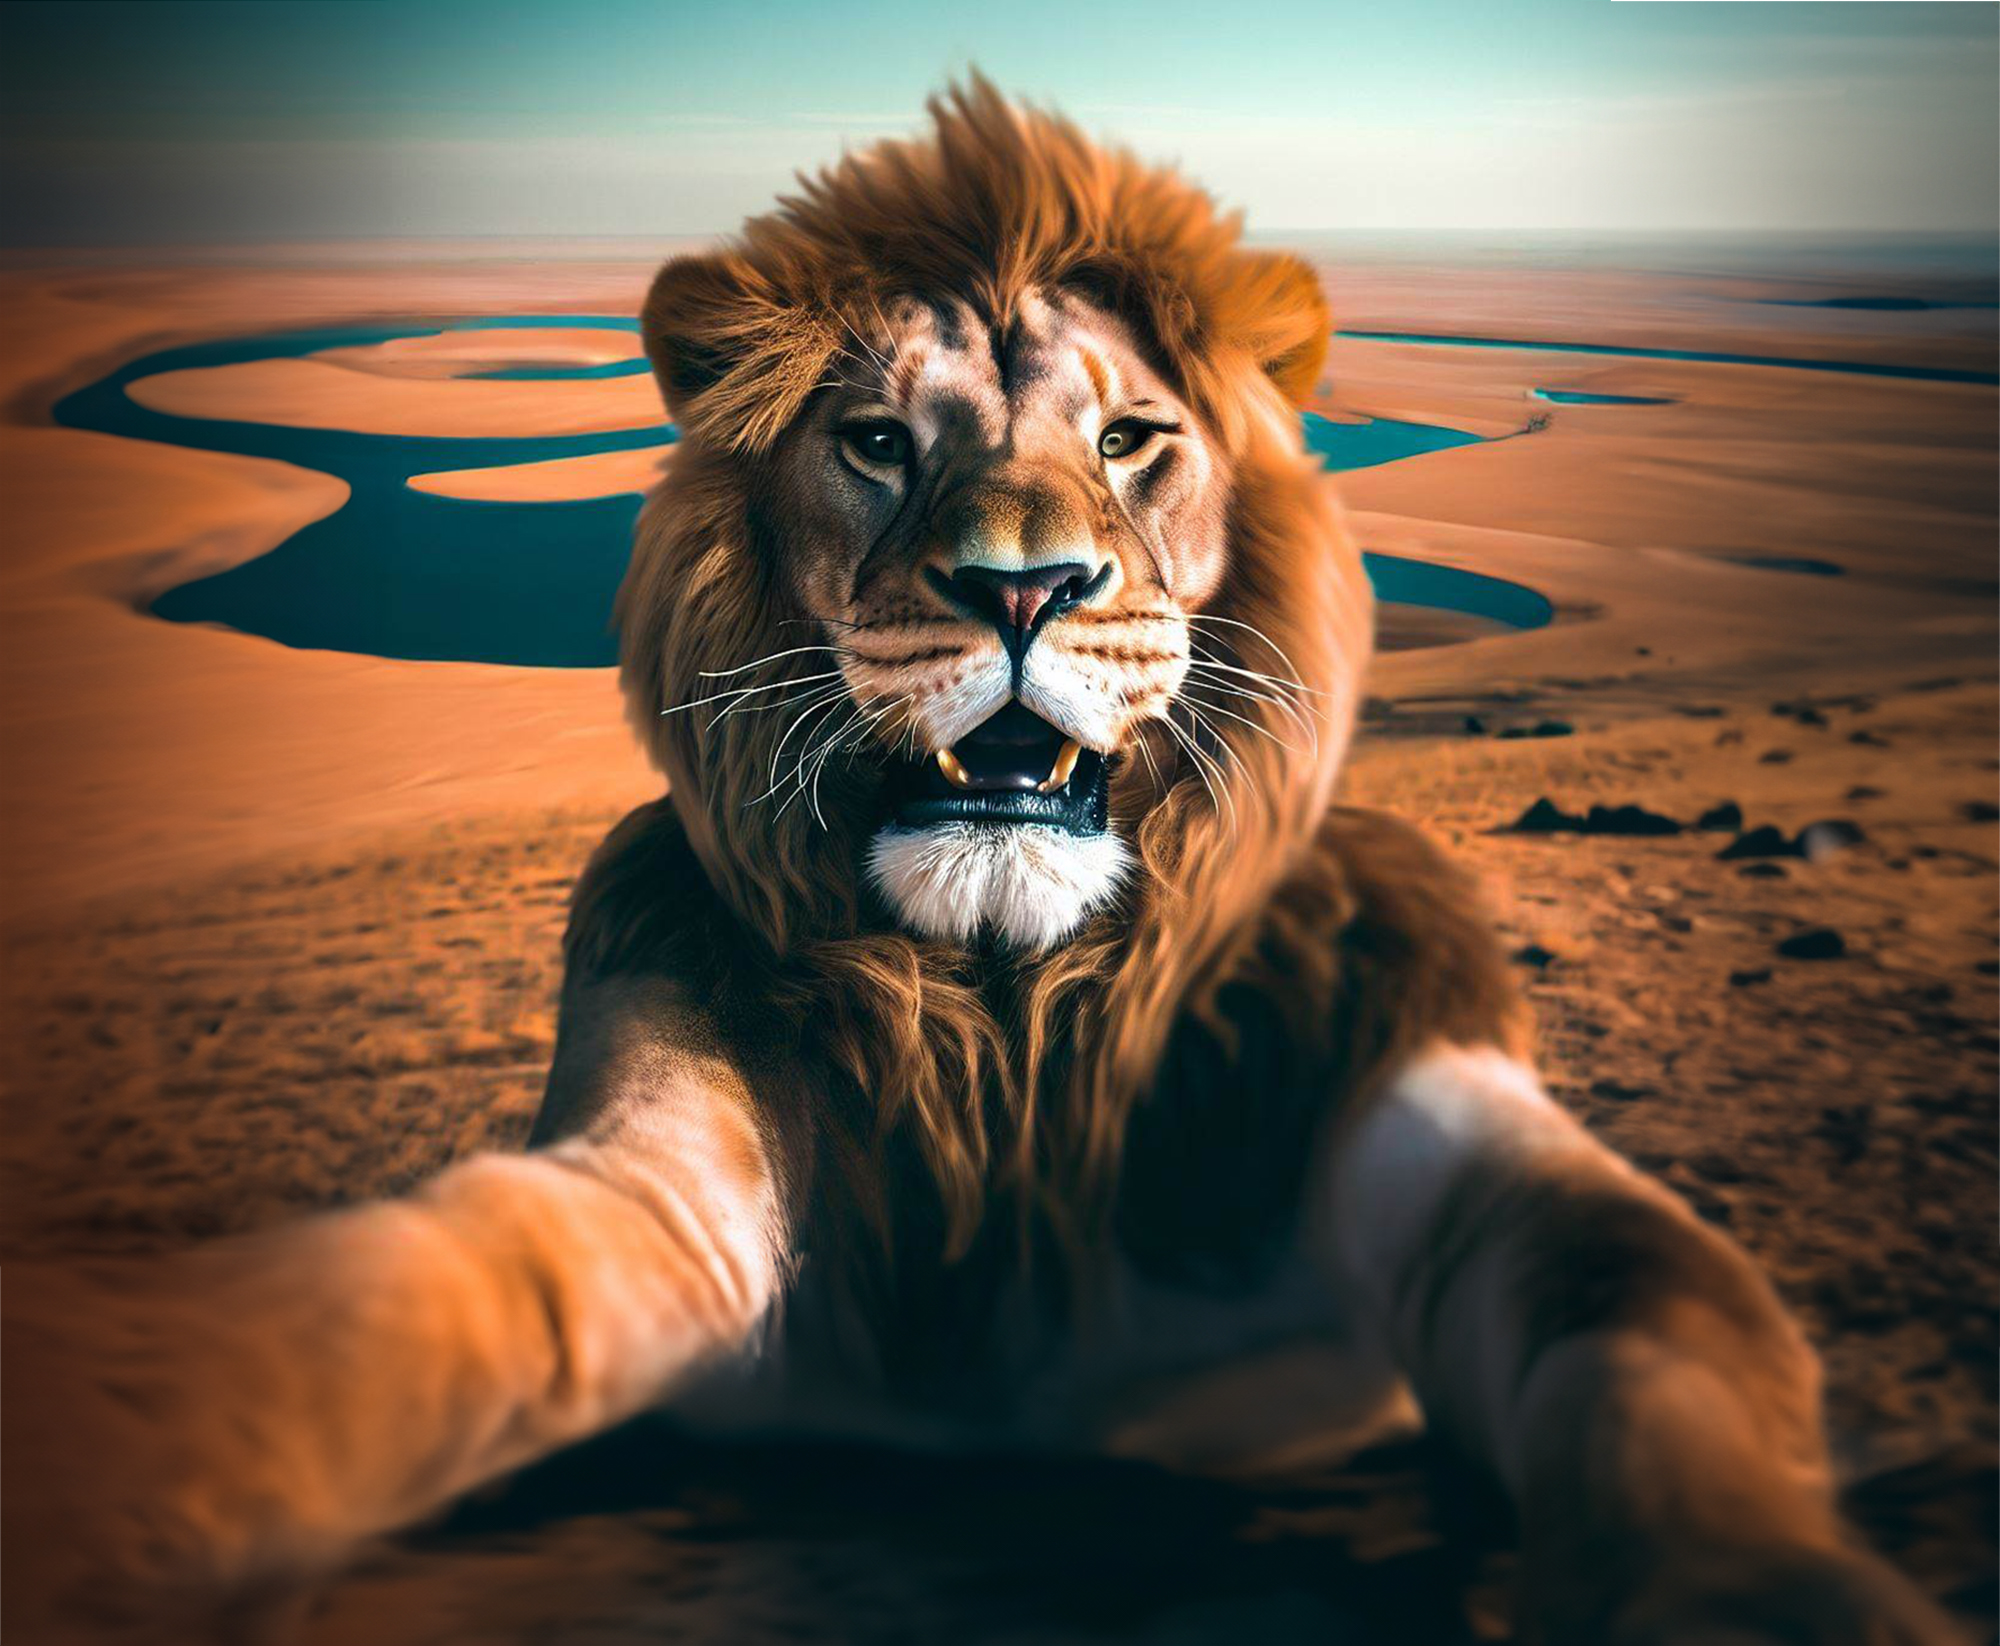 Lion Taking Selfie in a Desert With lakes Without Watermark ANd royalty Free Image download For Free